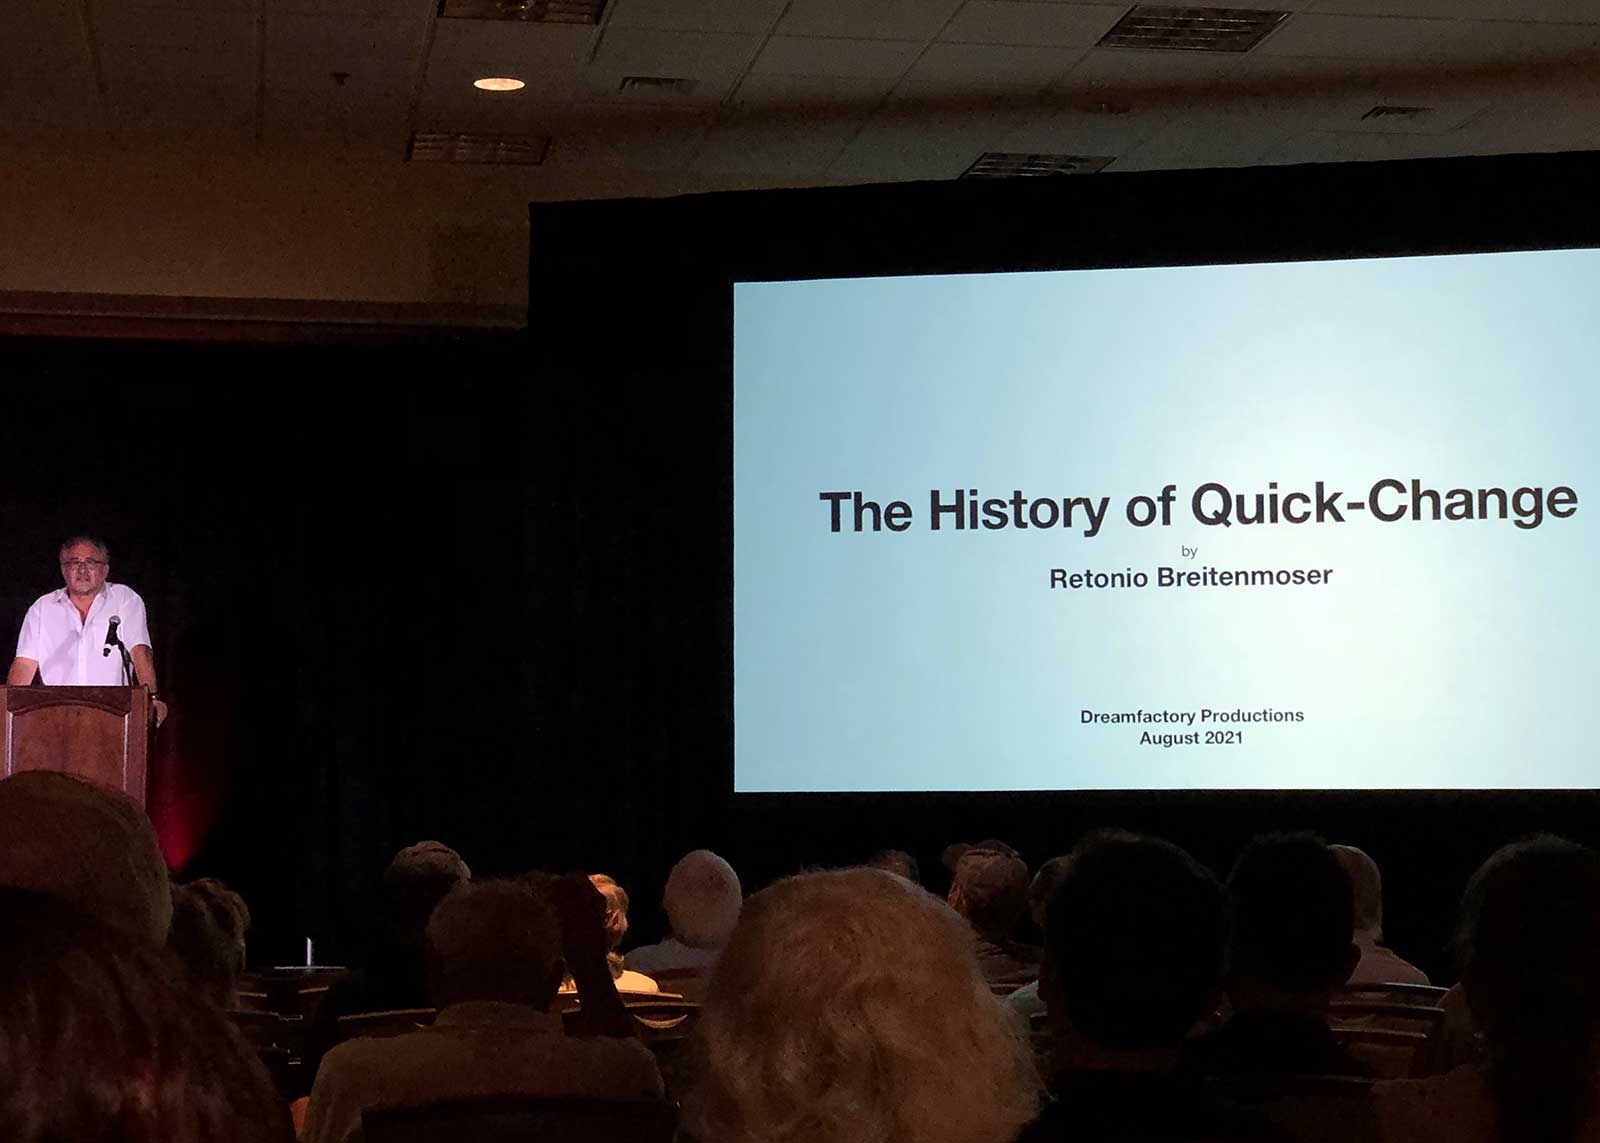 Magic Collectors Expo: Retonio Breitenmoser lectures about the history of quick-change